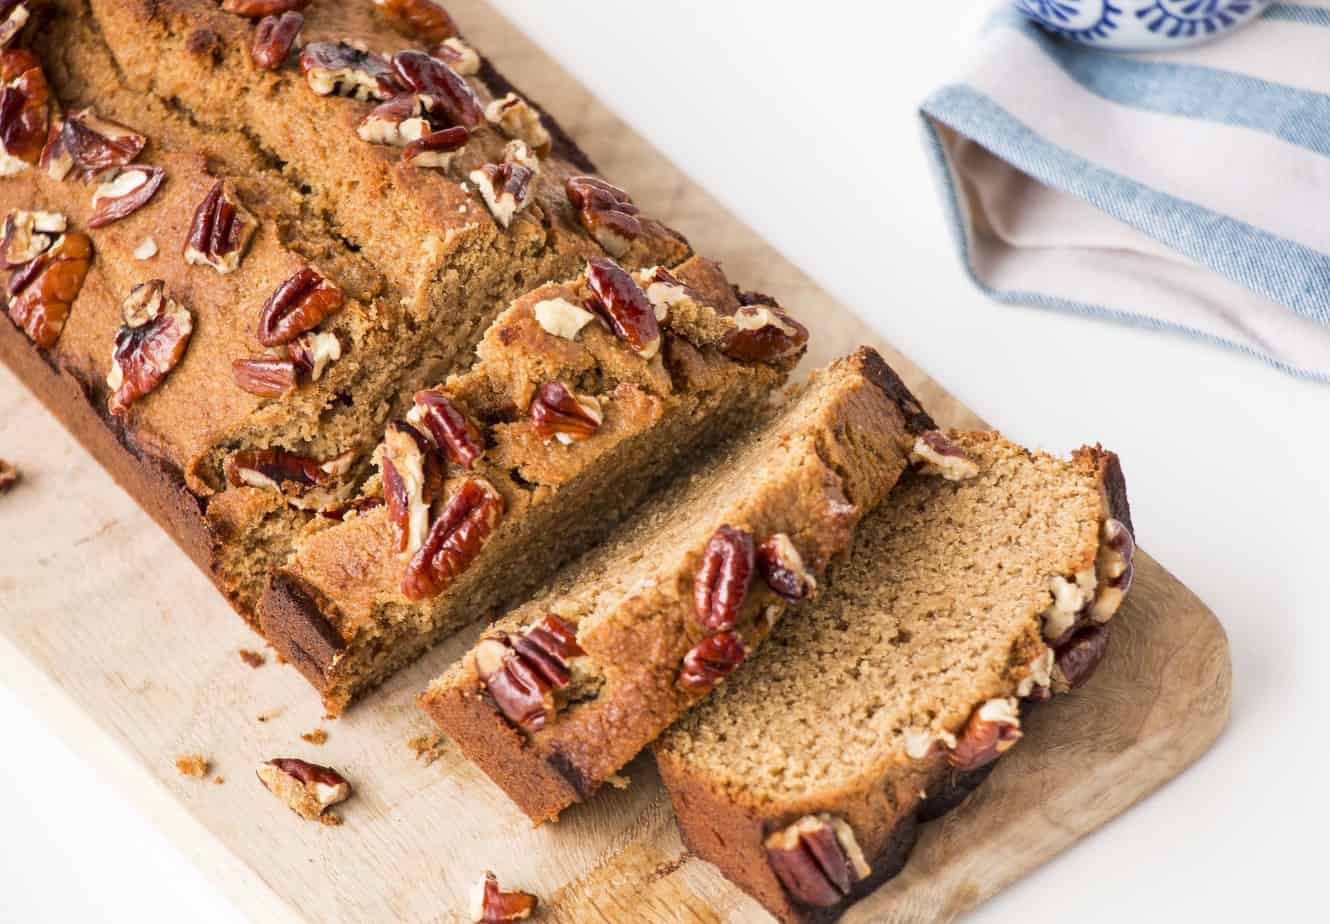 Banana Bread sliced and topped with pecans